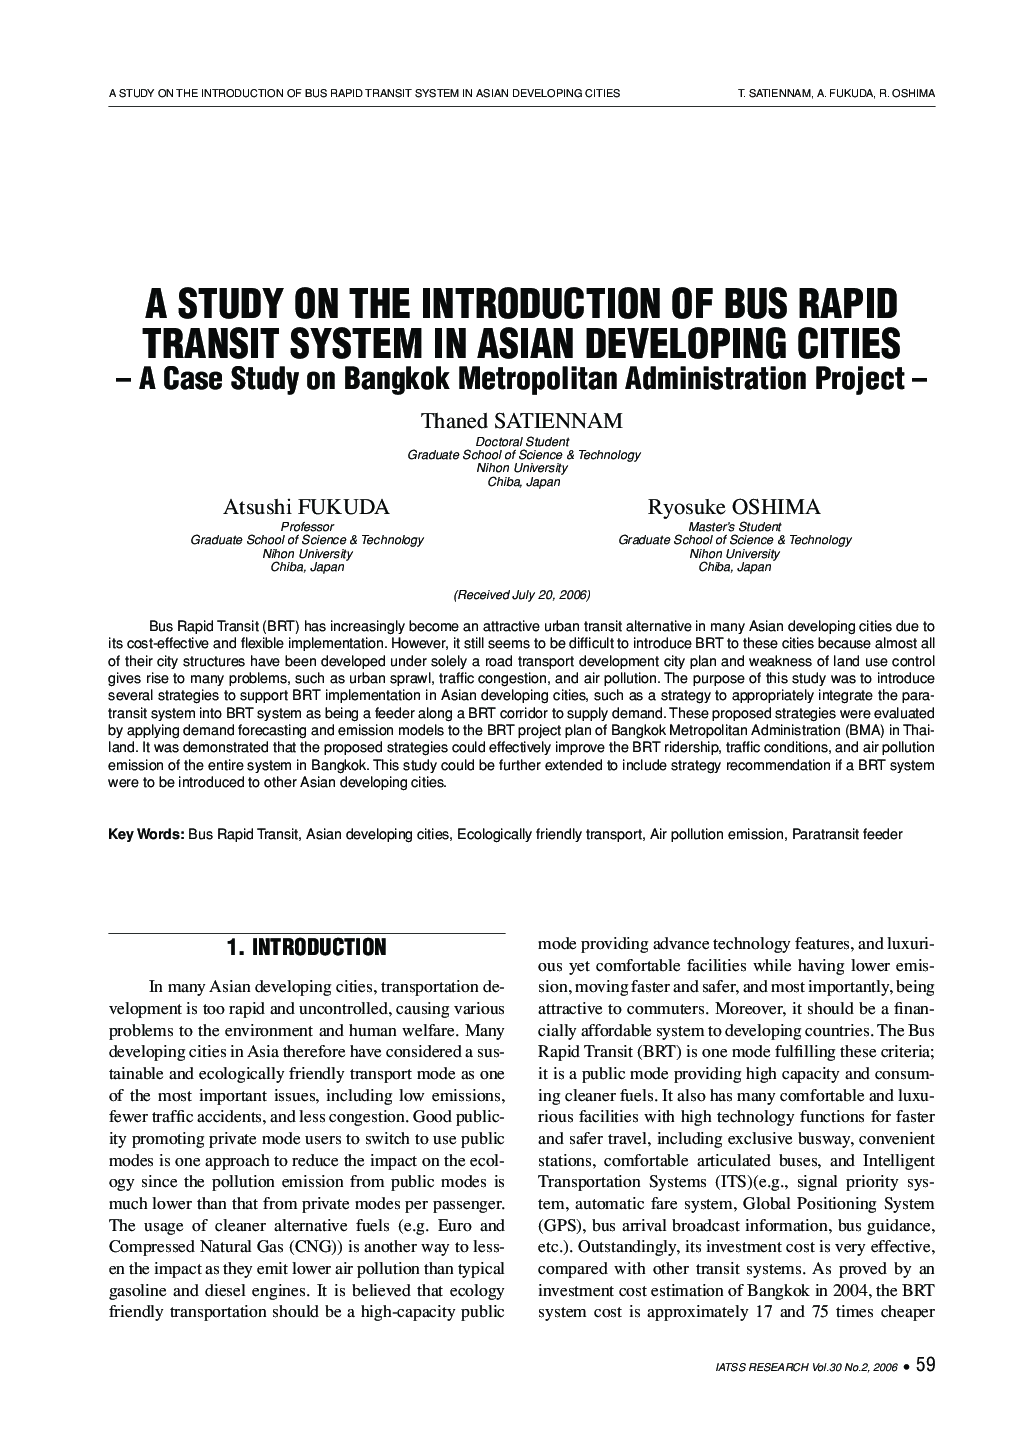 A STUDY ON THE INTRODUCTION OF BUS RAPID TRANSIT SYSTEM IN ASIAN DEVELOPING CITIES: A Case Study on Bangkok Metropolitan Administration Project